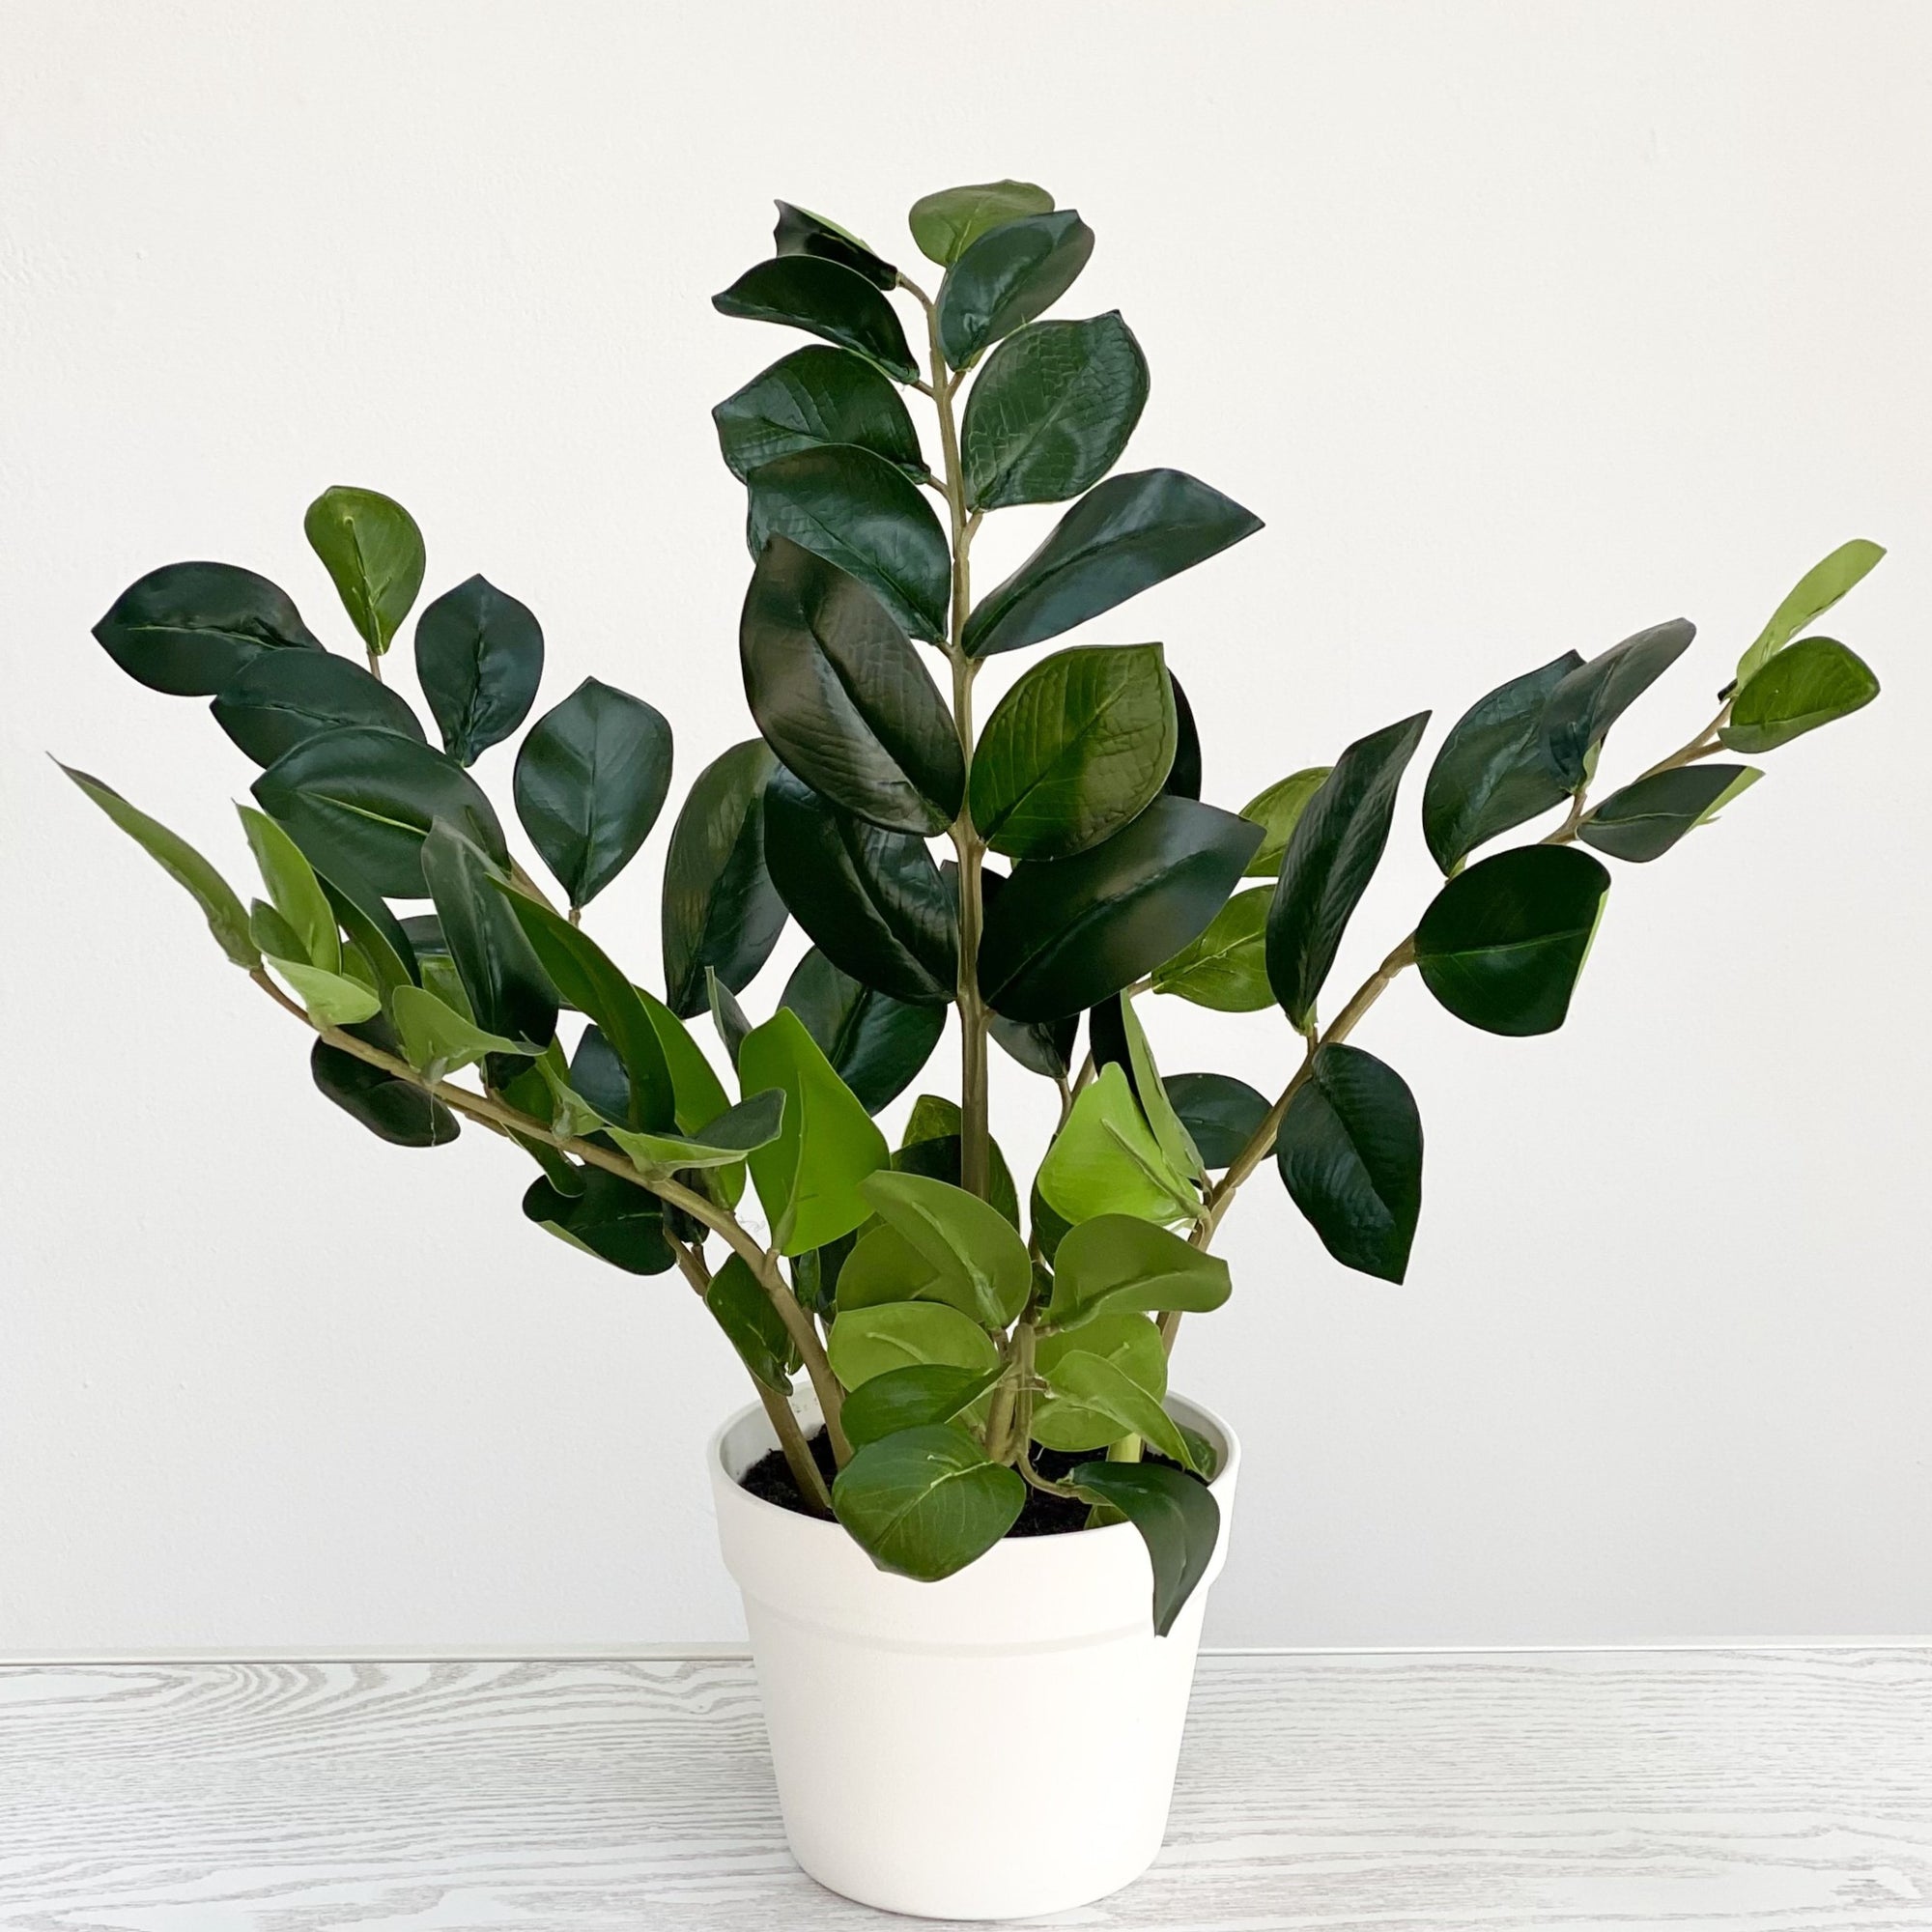 Eternity Potted Plant 23"